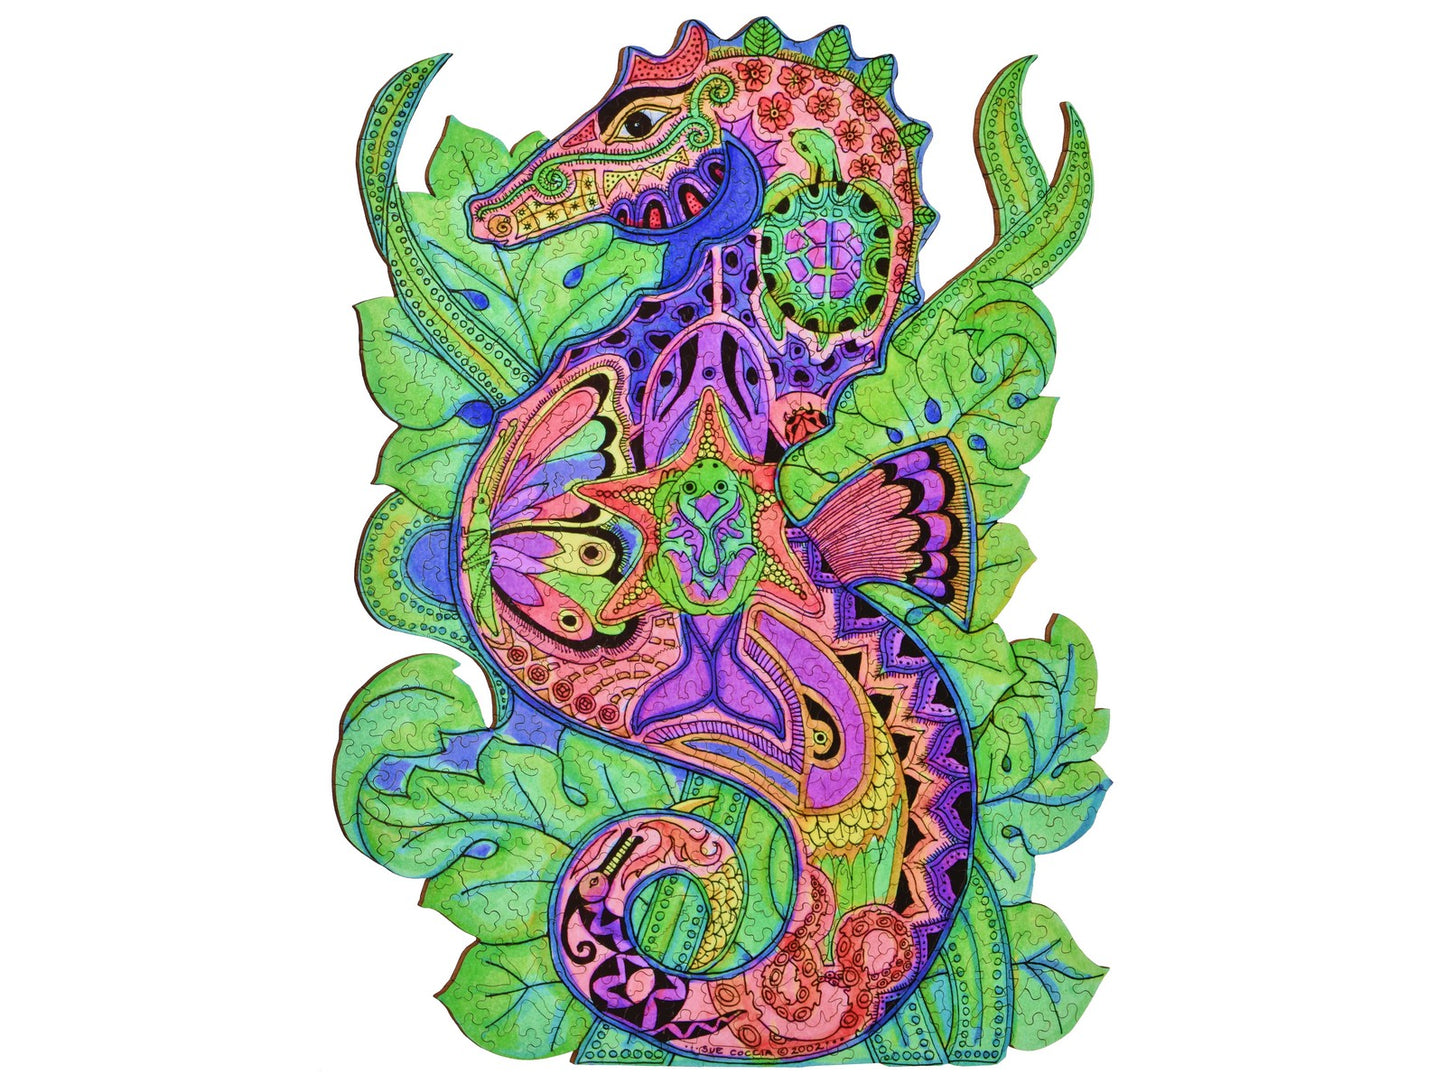 The front of the puzzle, Seahorse, which shows a colorful line drawing of a seahorse.